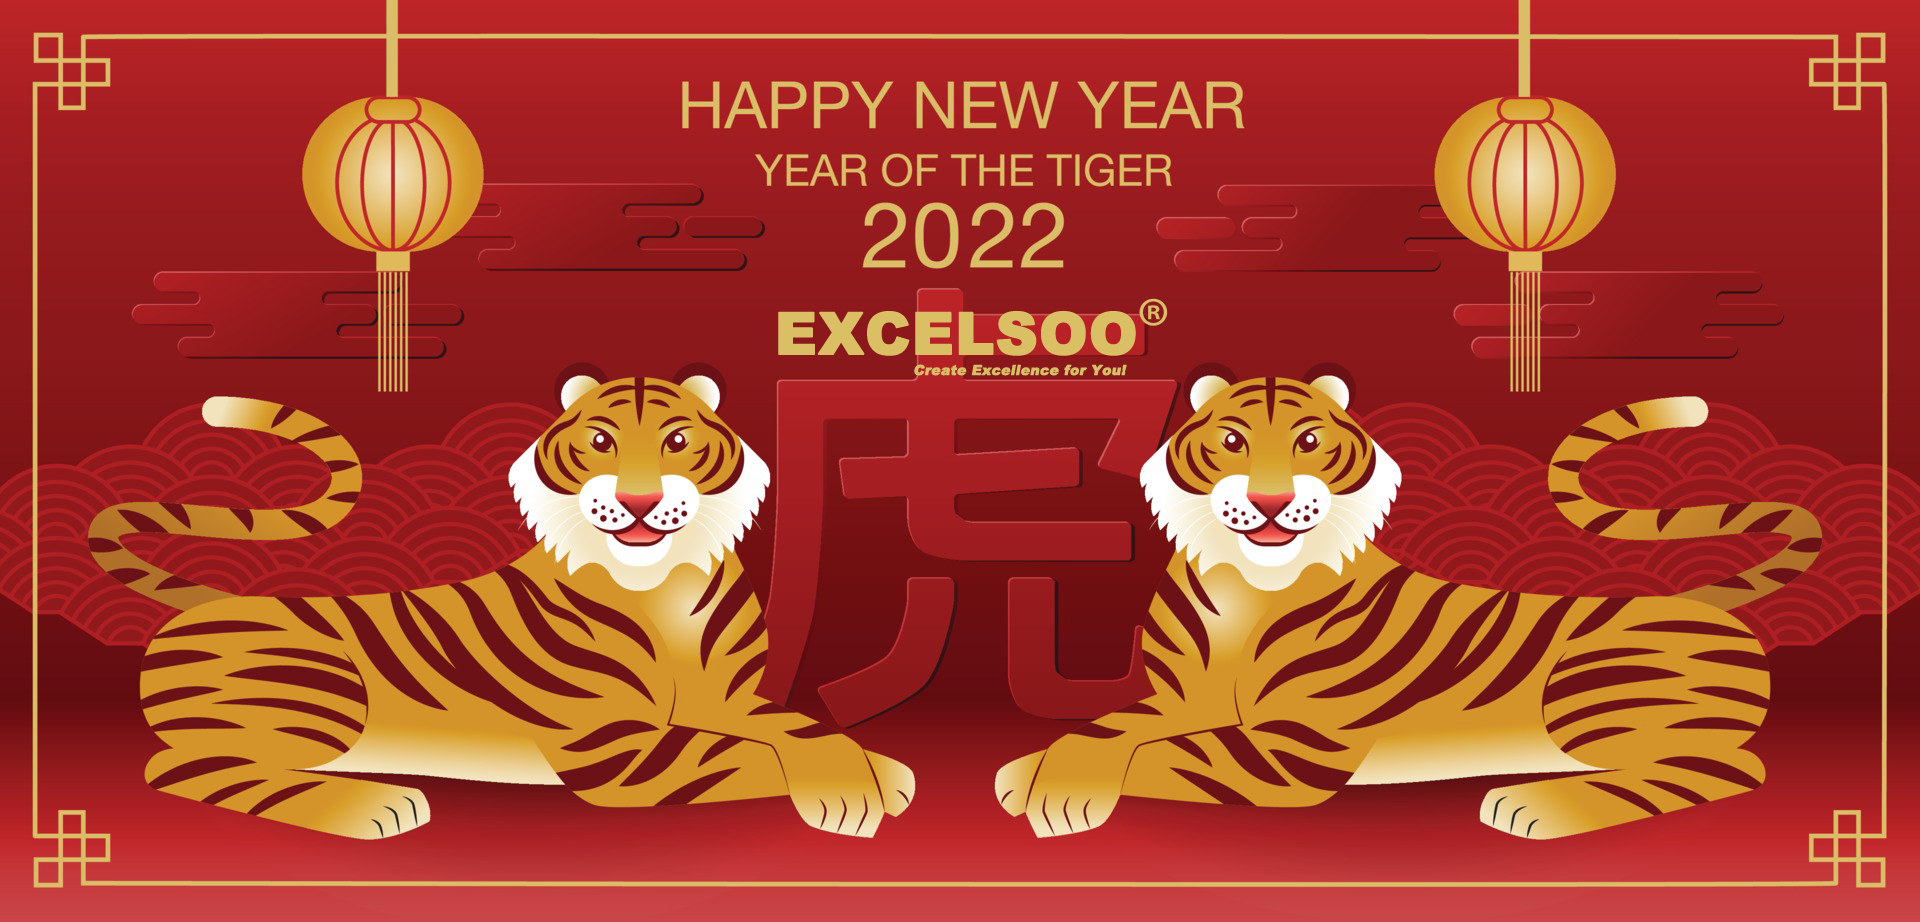 the 2022 Chinese New Year Holiday of Shenzhen Excelsoo